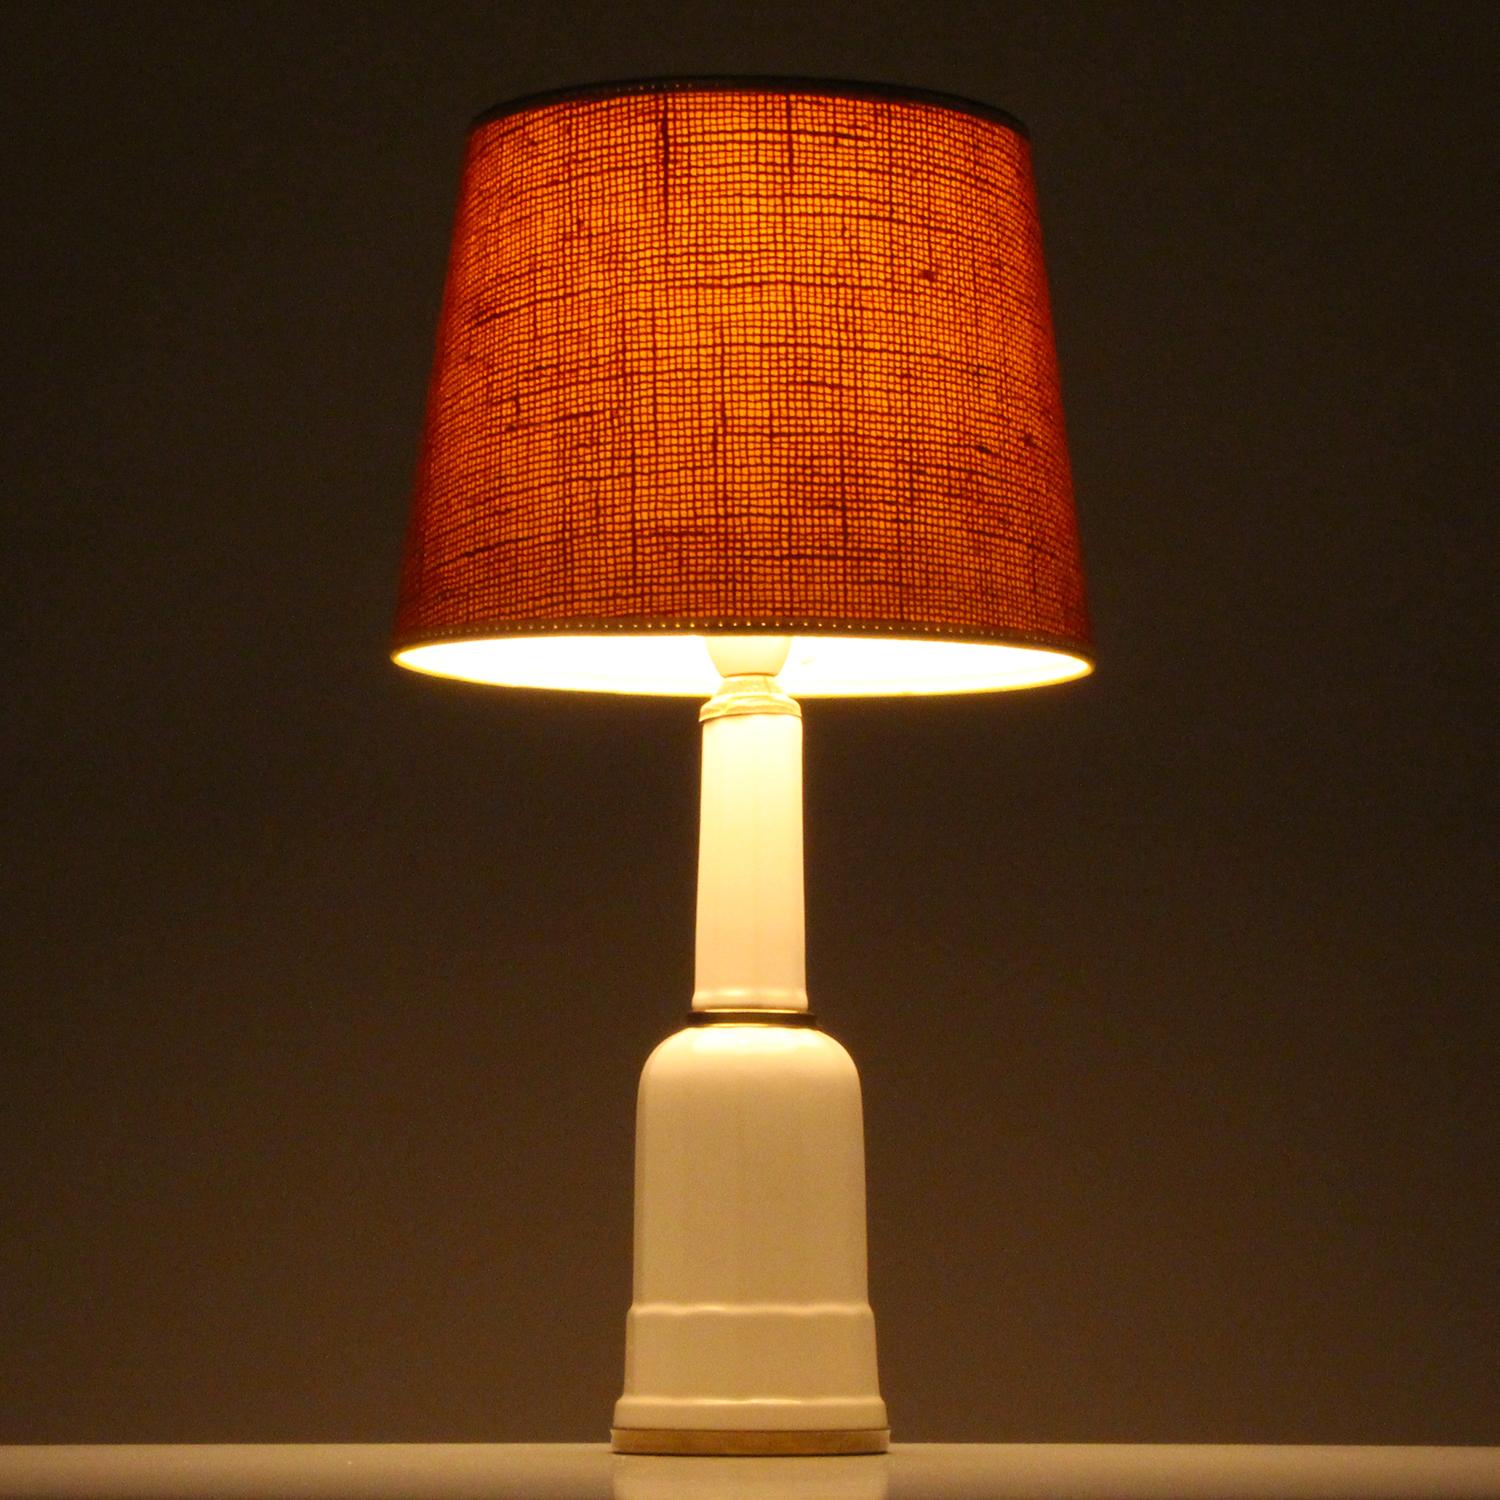 Danish HEIBERG TABLE LIGHT by Soholm in the 1960s - with vintage hessian shade included